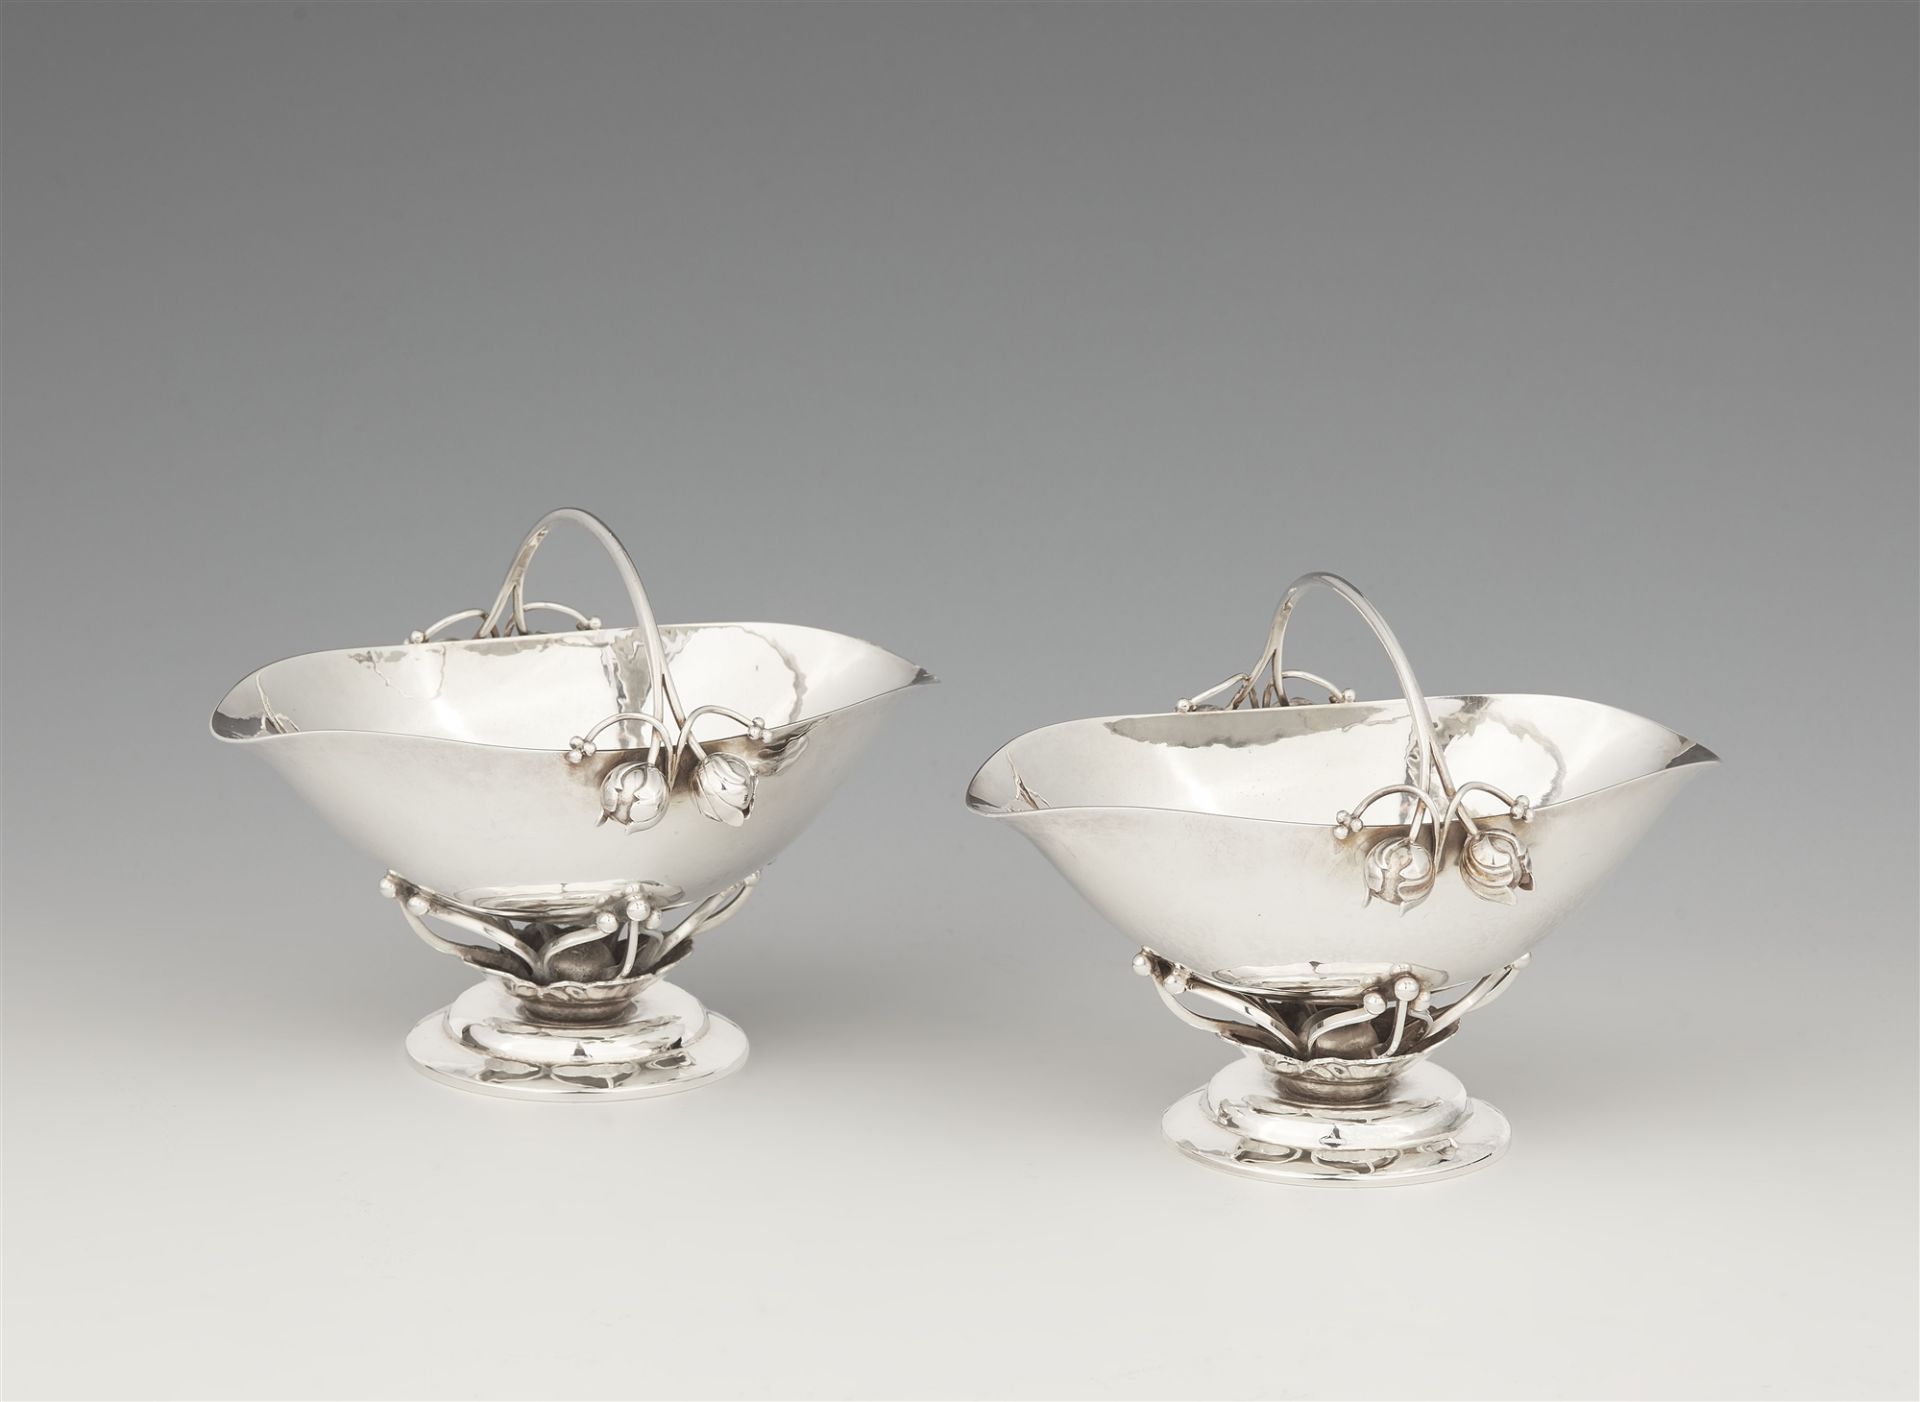 A pair of Copenhagen silver sweetmeats dishes, model no. 235